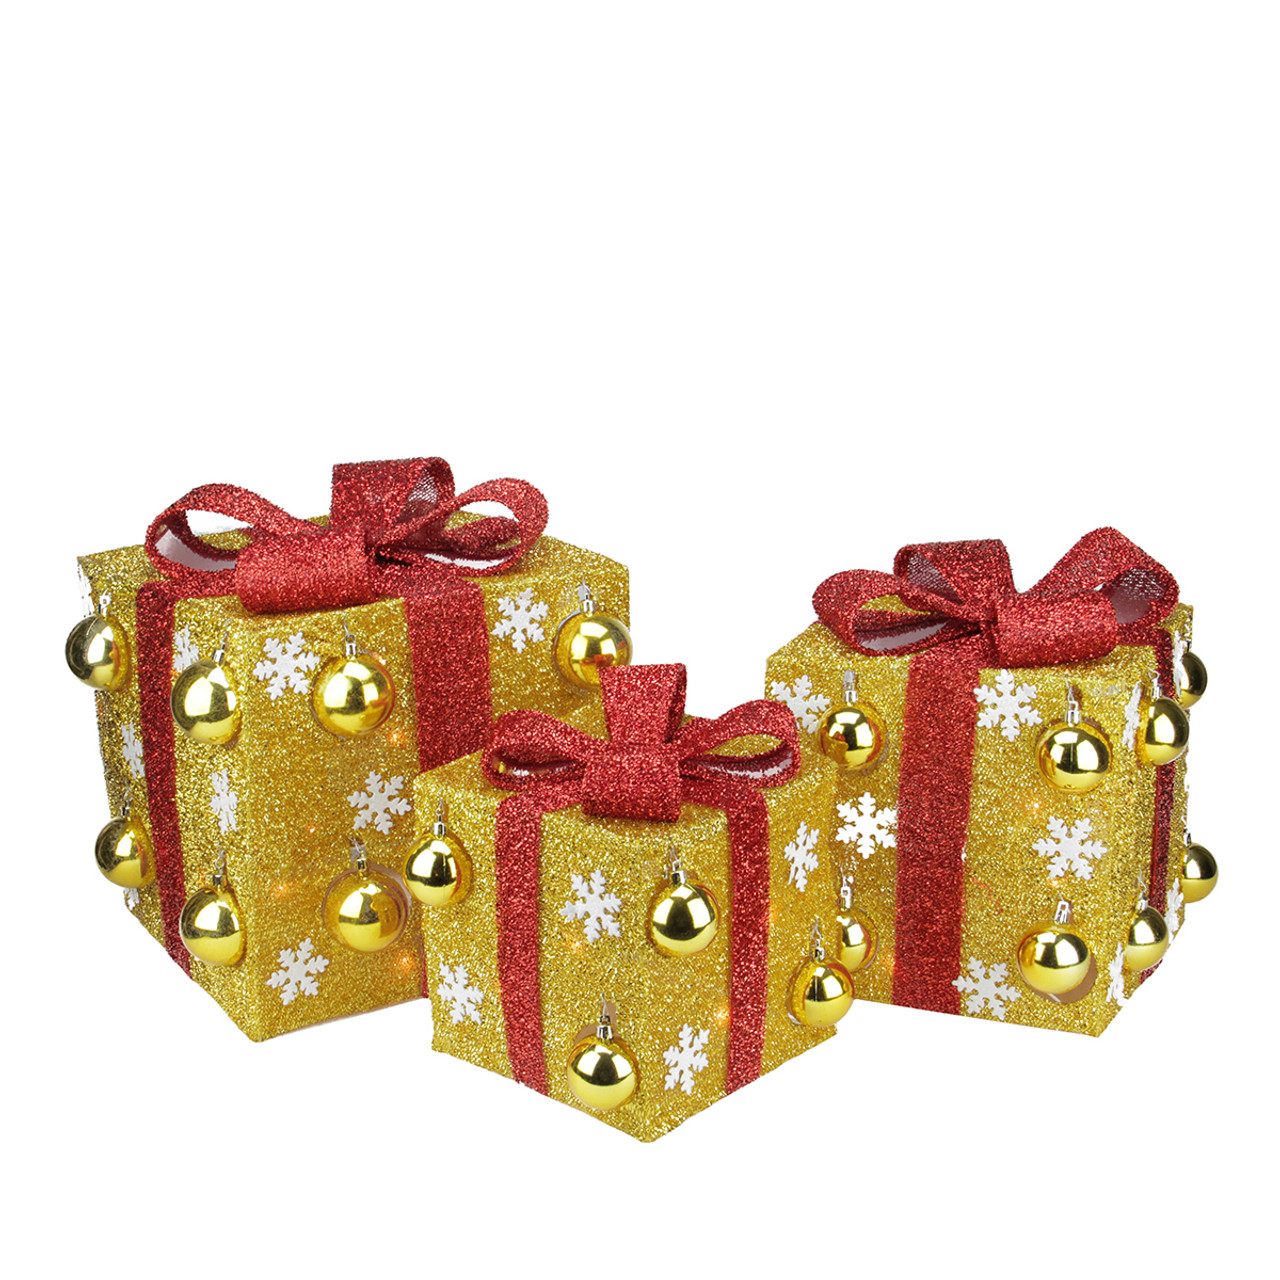 Northlight 3-Pc. 18 Lighted Tall Gold Sisal Gift Boxes with Bows Christmas  Outdoor Decor - Red